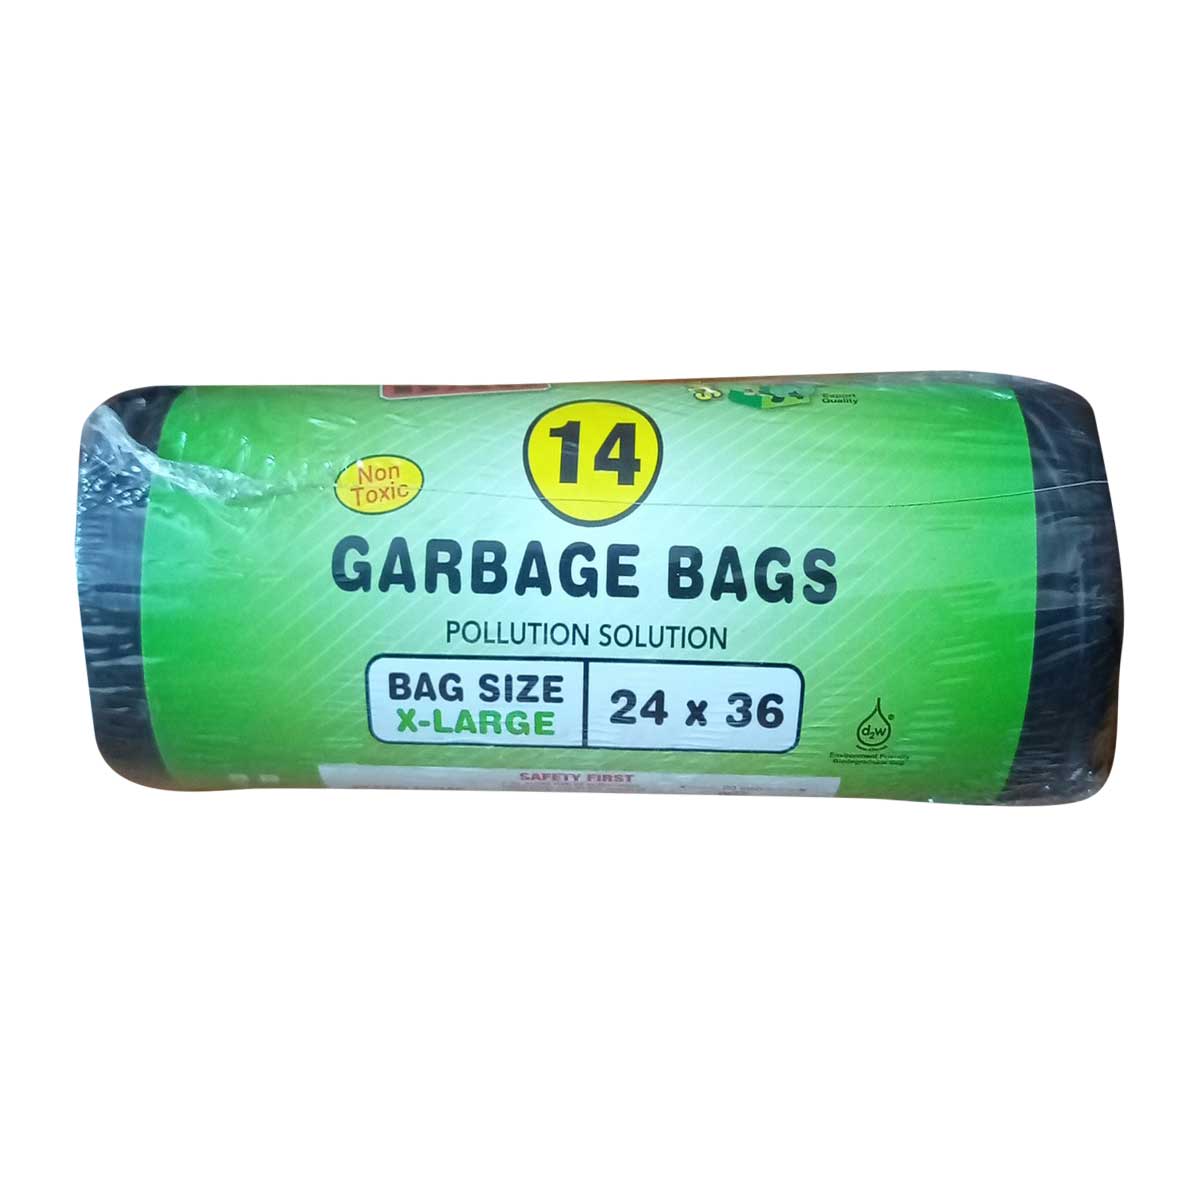 95 GALLON ] - 2 MILL - Extra Large Black Garbage Bags, Huge Size Garbage  Can L | eBay